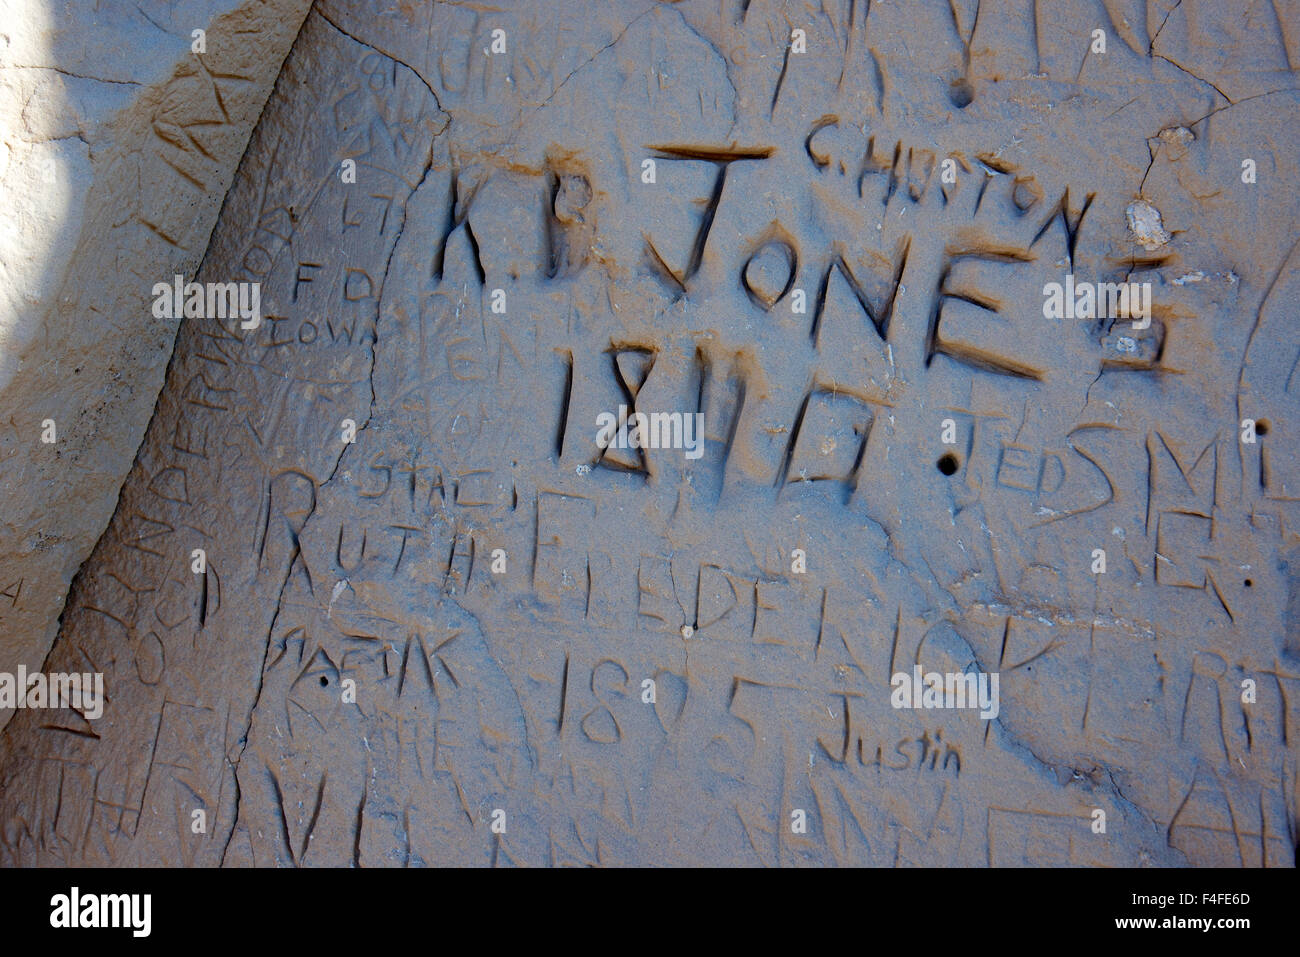 K.R. Jones, 1840. Register Cliff was a key navigational landmark on the Oregon Trail as it passed along the North Platte River near present Day Guernsey Wyoming. Many emigrants carved their name in the soft sandstone. (Large format sizes available) Stock Photo